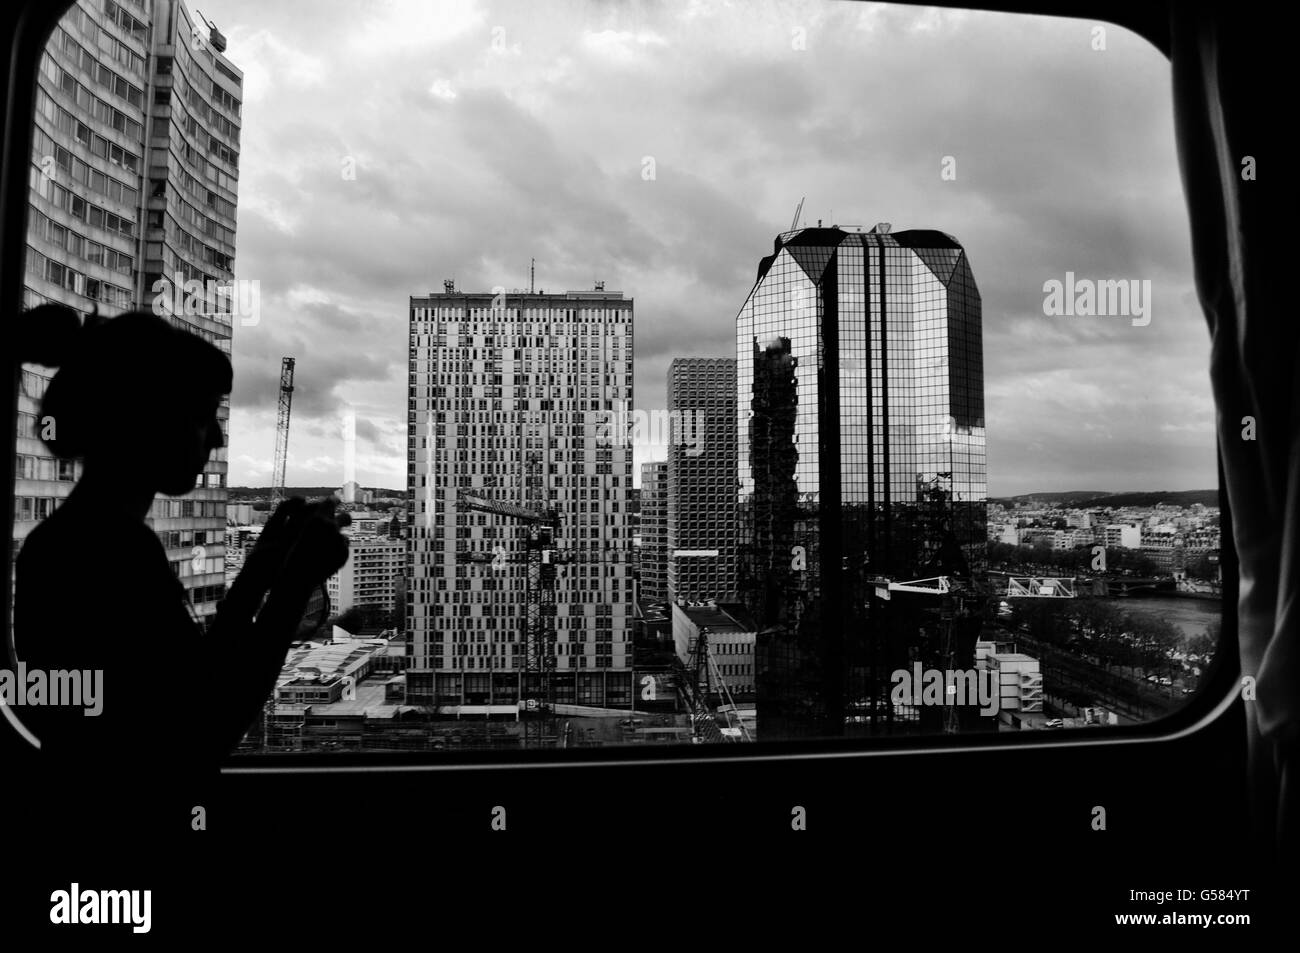 a woman takes a photograph from the hotel's window in Paris Stock Photo